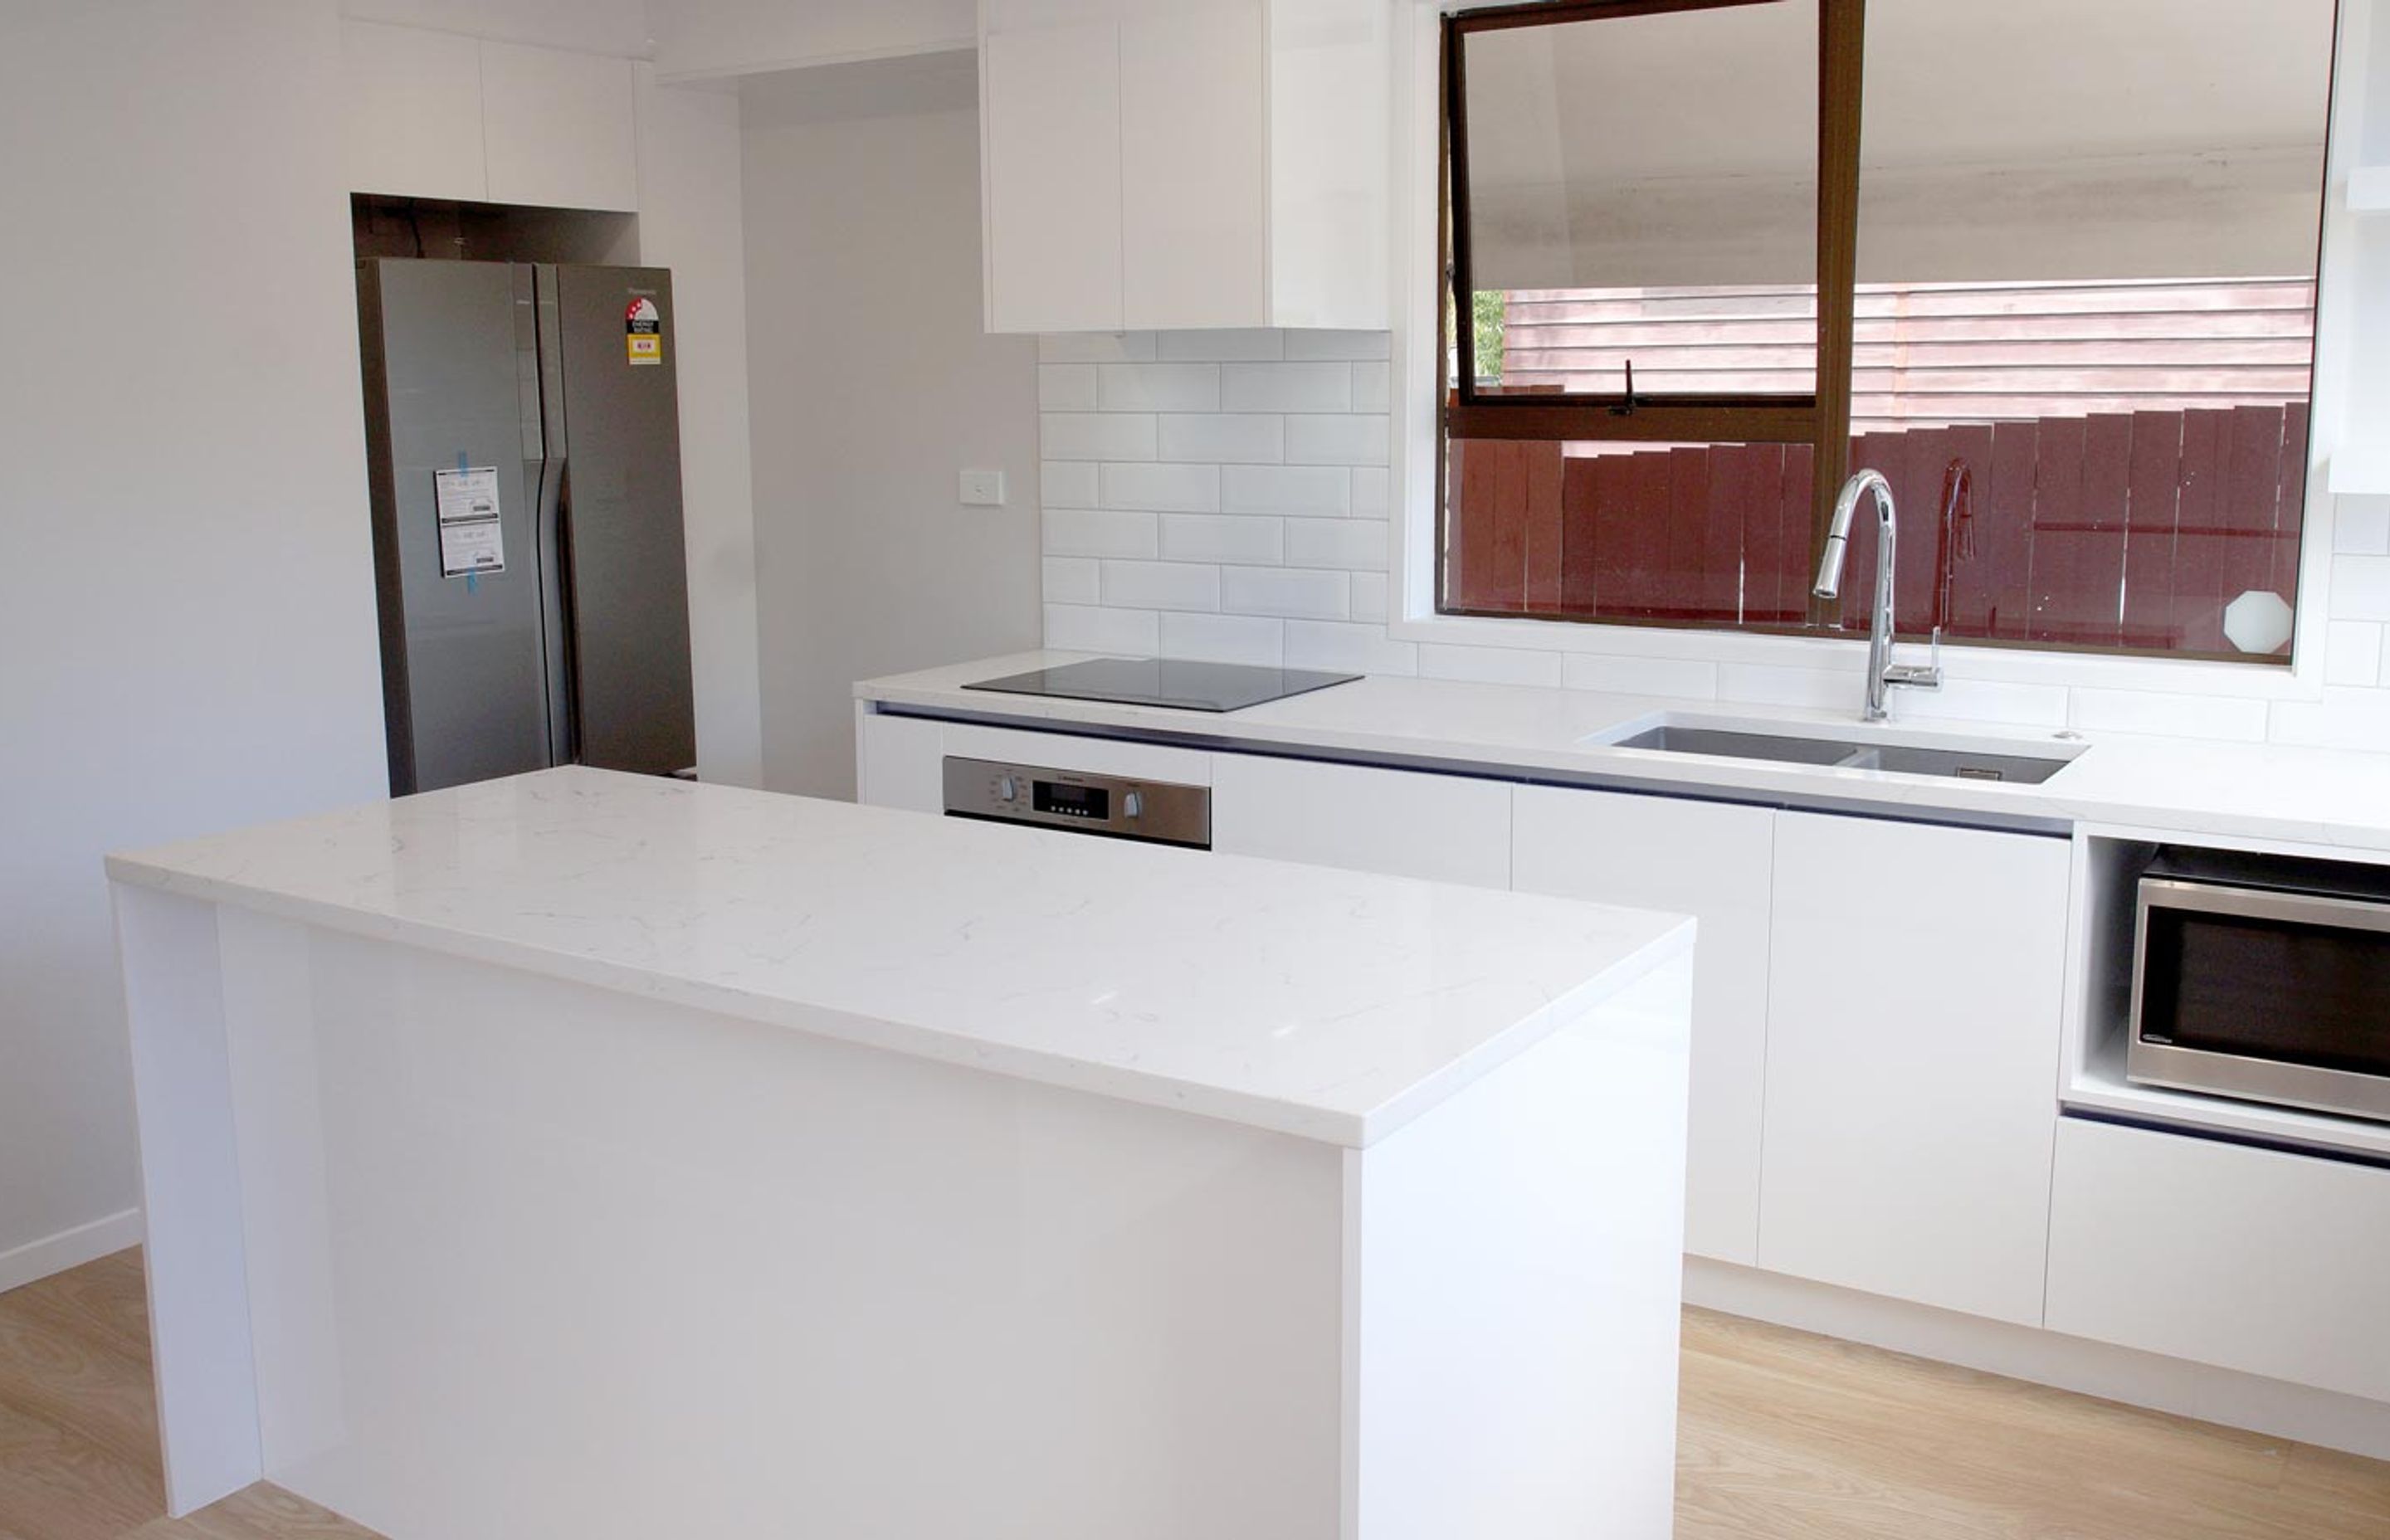 Another example of plain slabs used for cabinets – Modern kitchen in Avondale